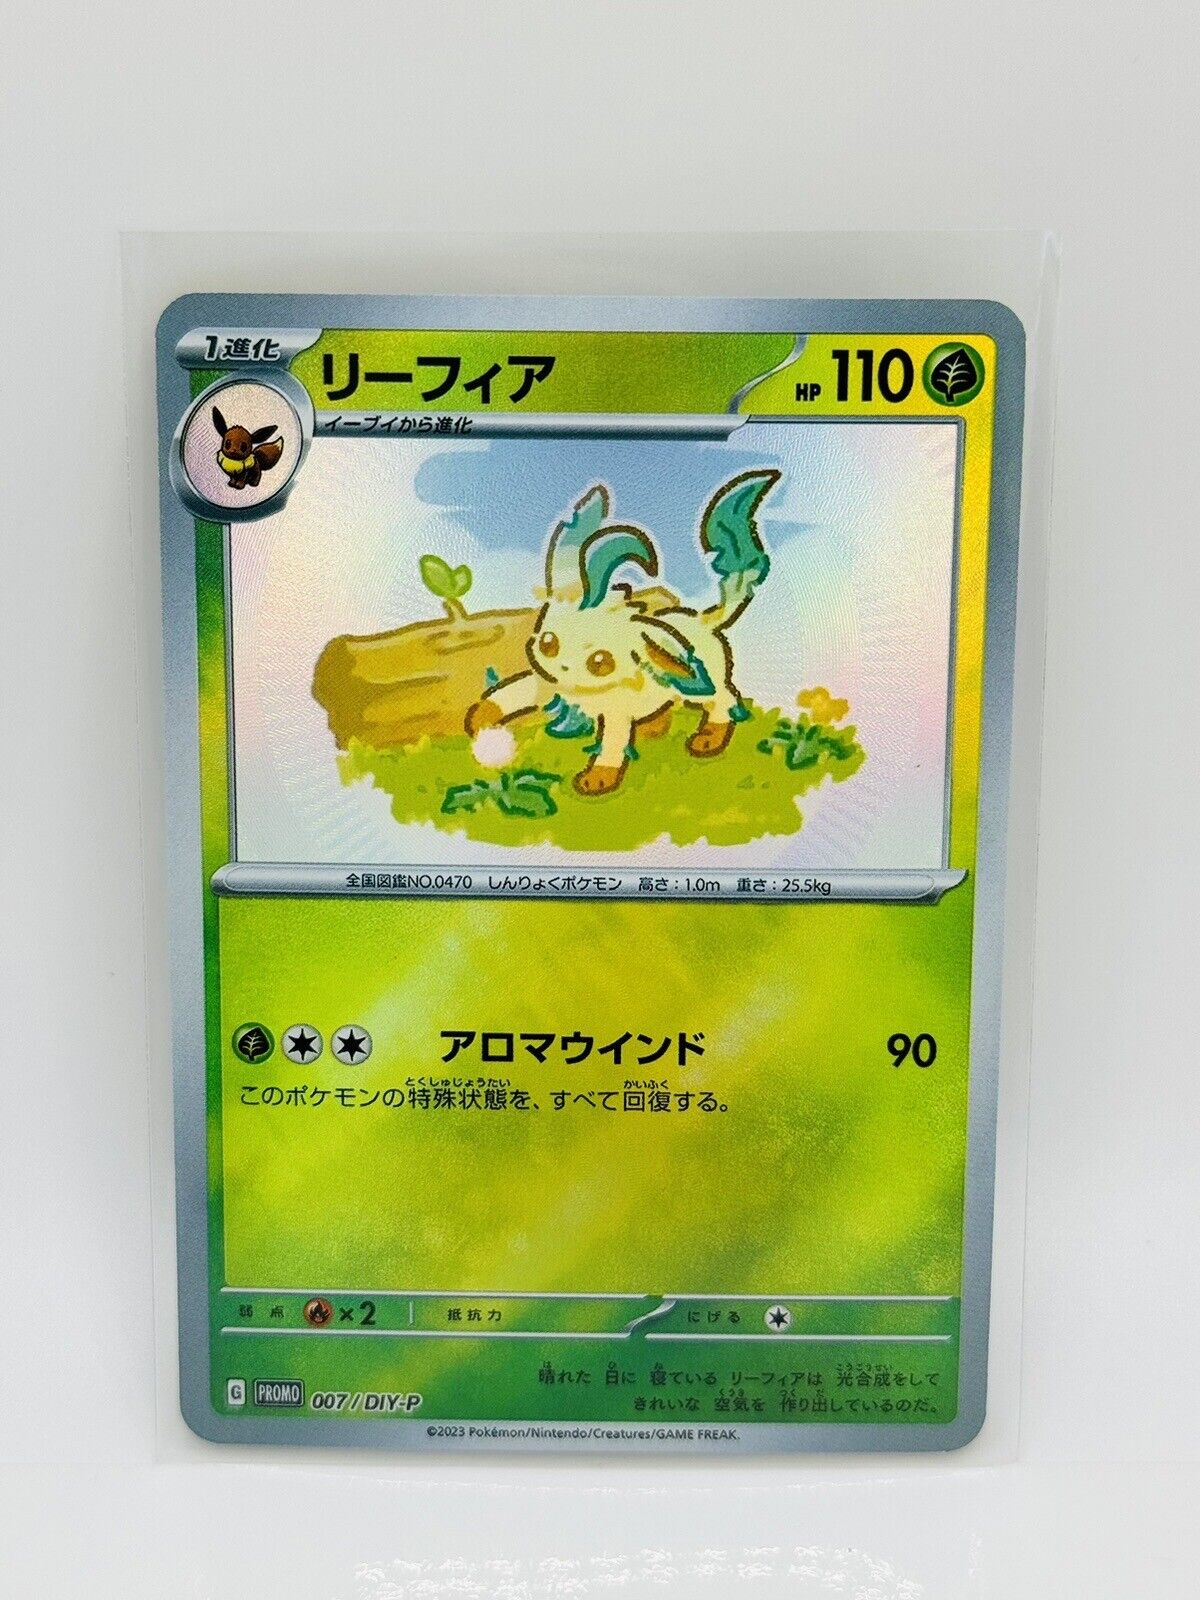 Fan Art / Holographic/ Leafeon Eevee Evolutions Anime Card